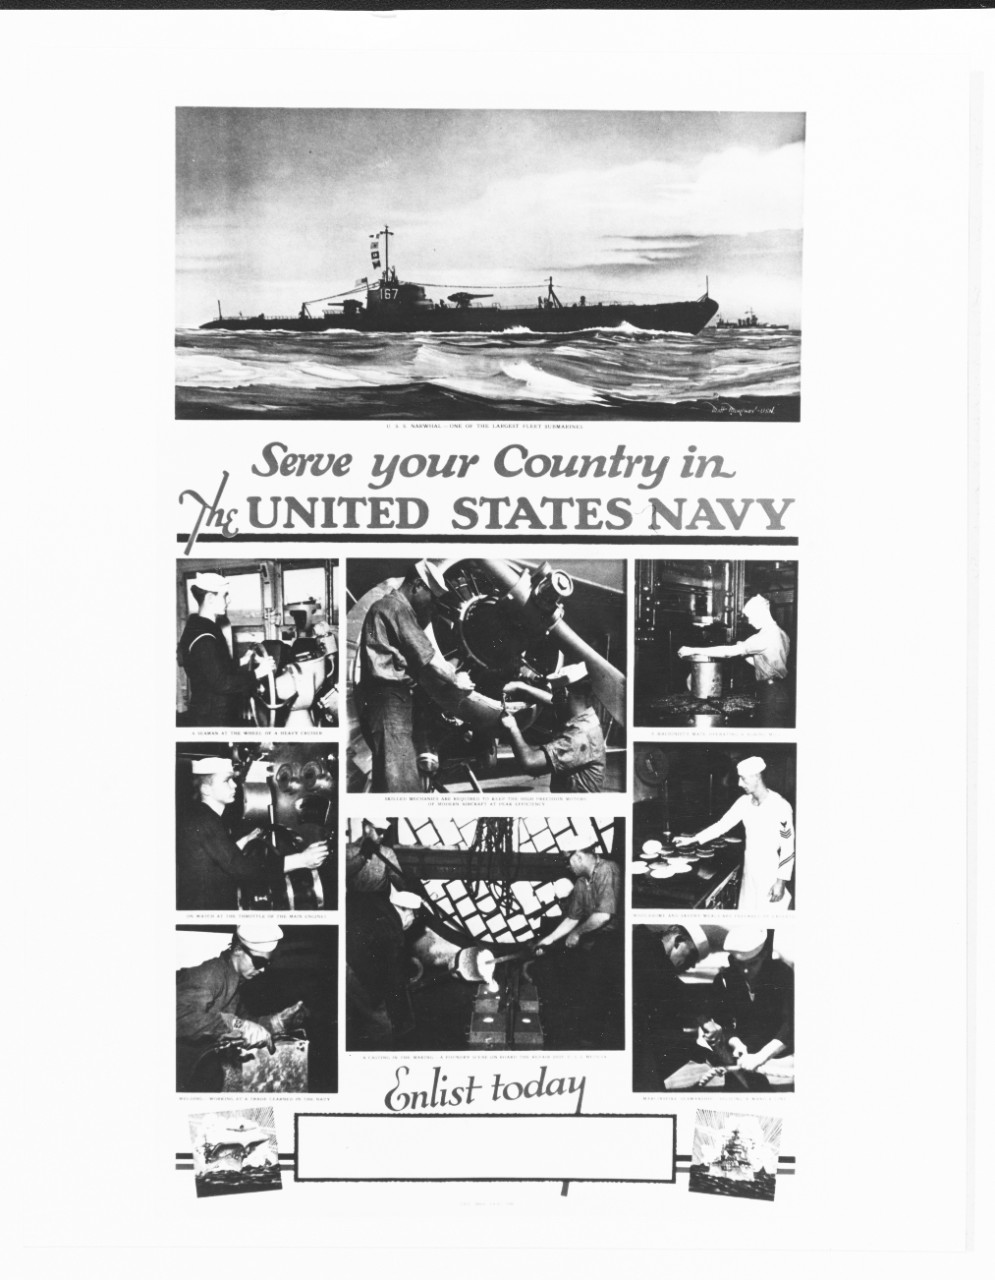 Navy poster, "Serve your Country in the United States Navy."